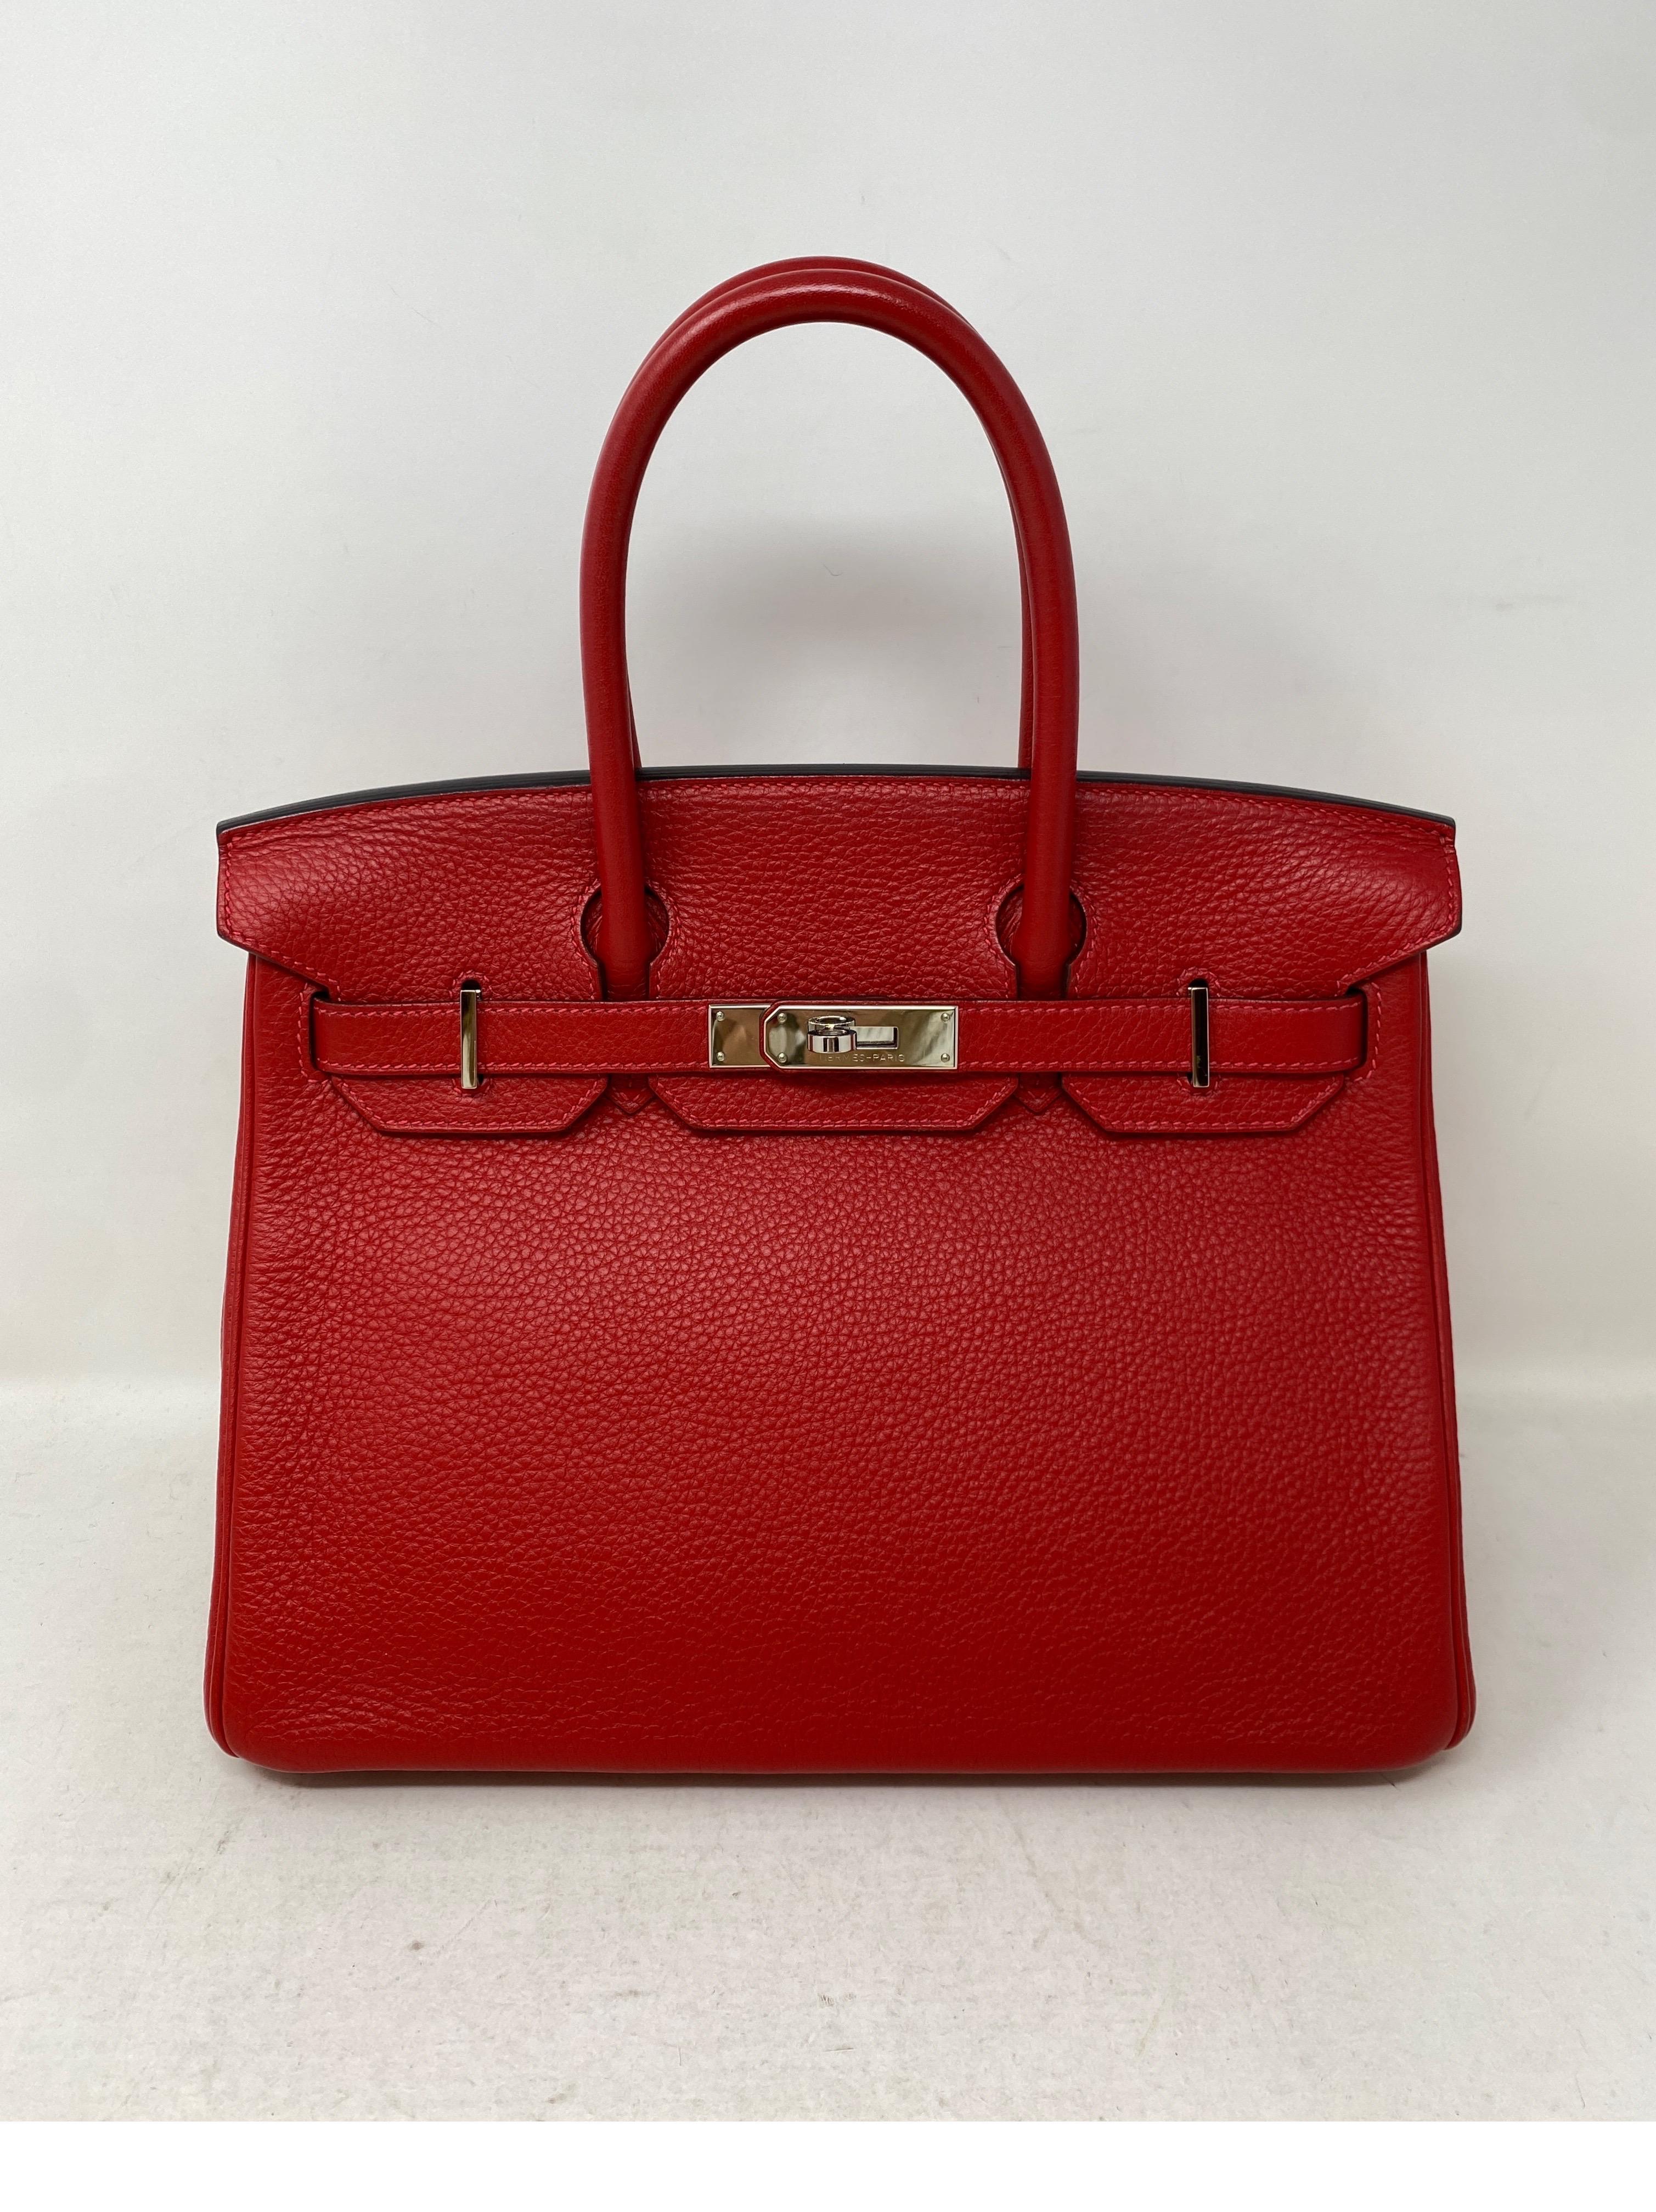 Hermes Rouge Casaque Birkin 30 Bag. Silver palladium hardware. Excellent condition. Interior clean. Beautiful vibrant red color. Most wanted rare size 30. Includes clochette, lock, keys, and dust bag. Guaranteed authentic. 